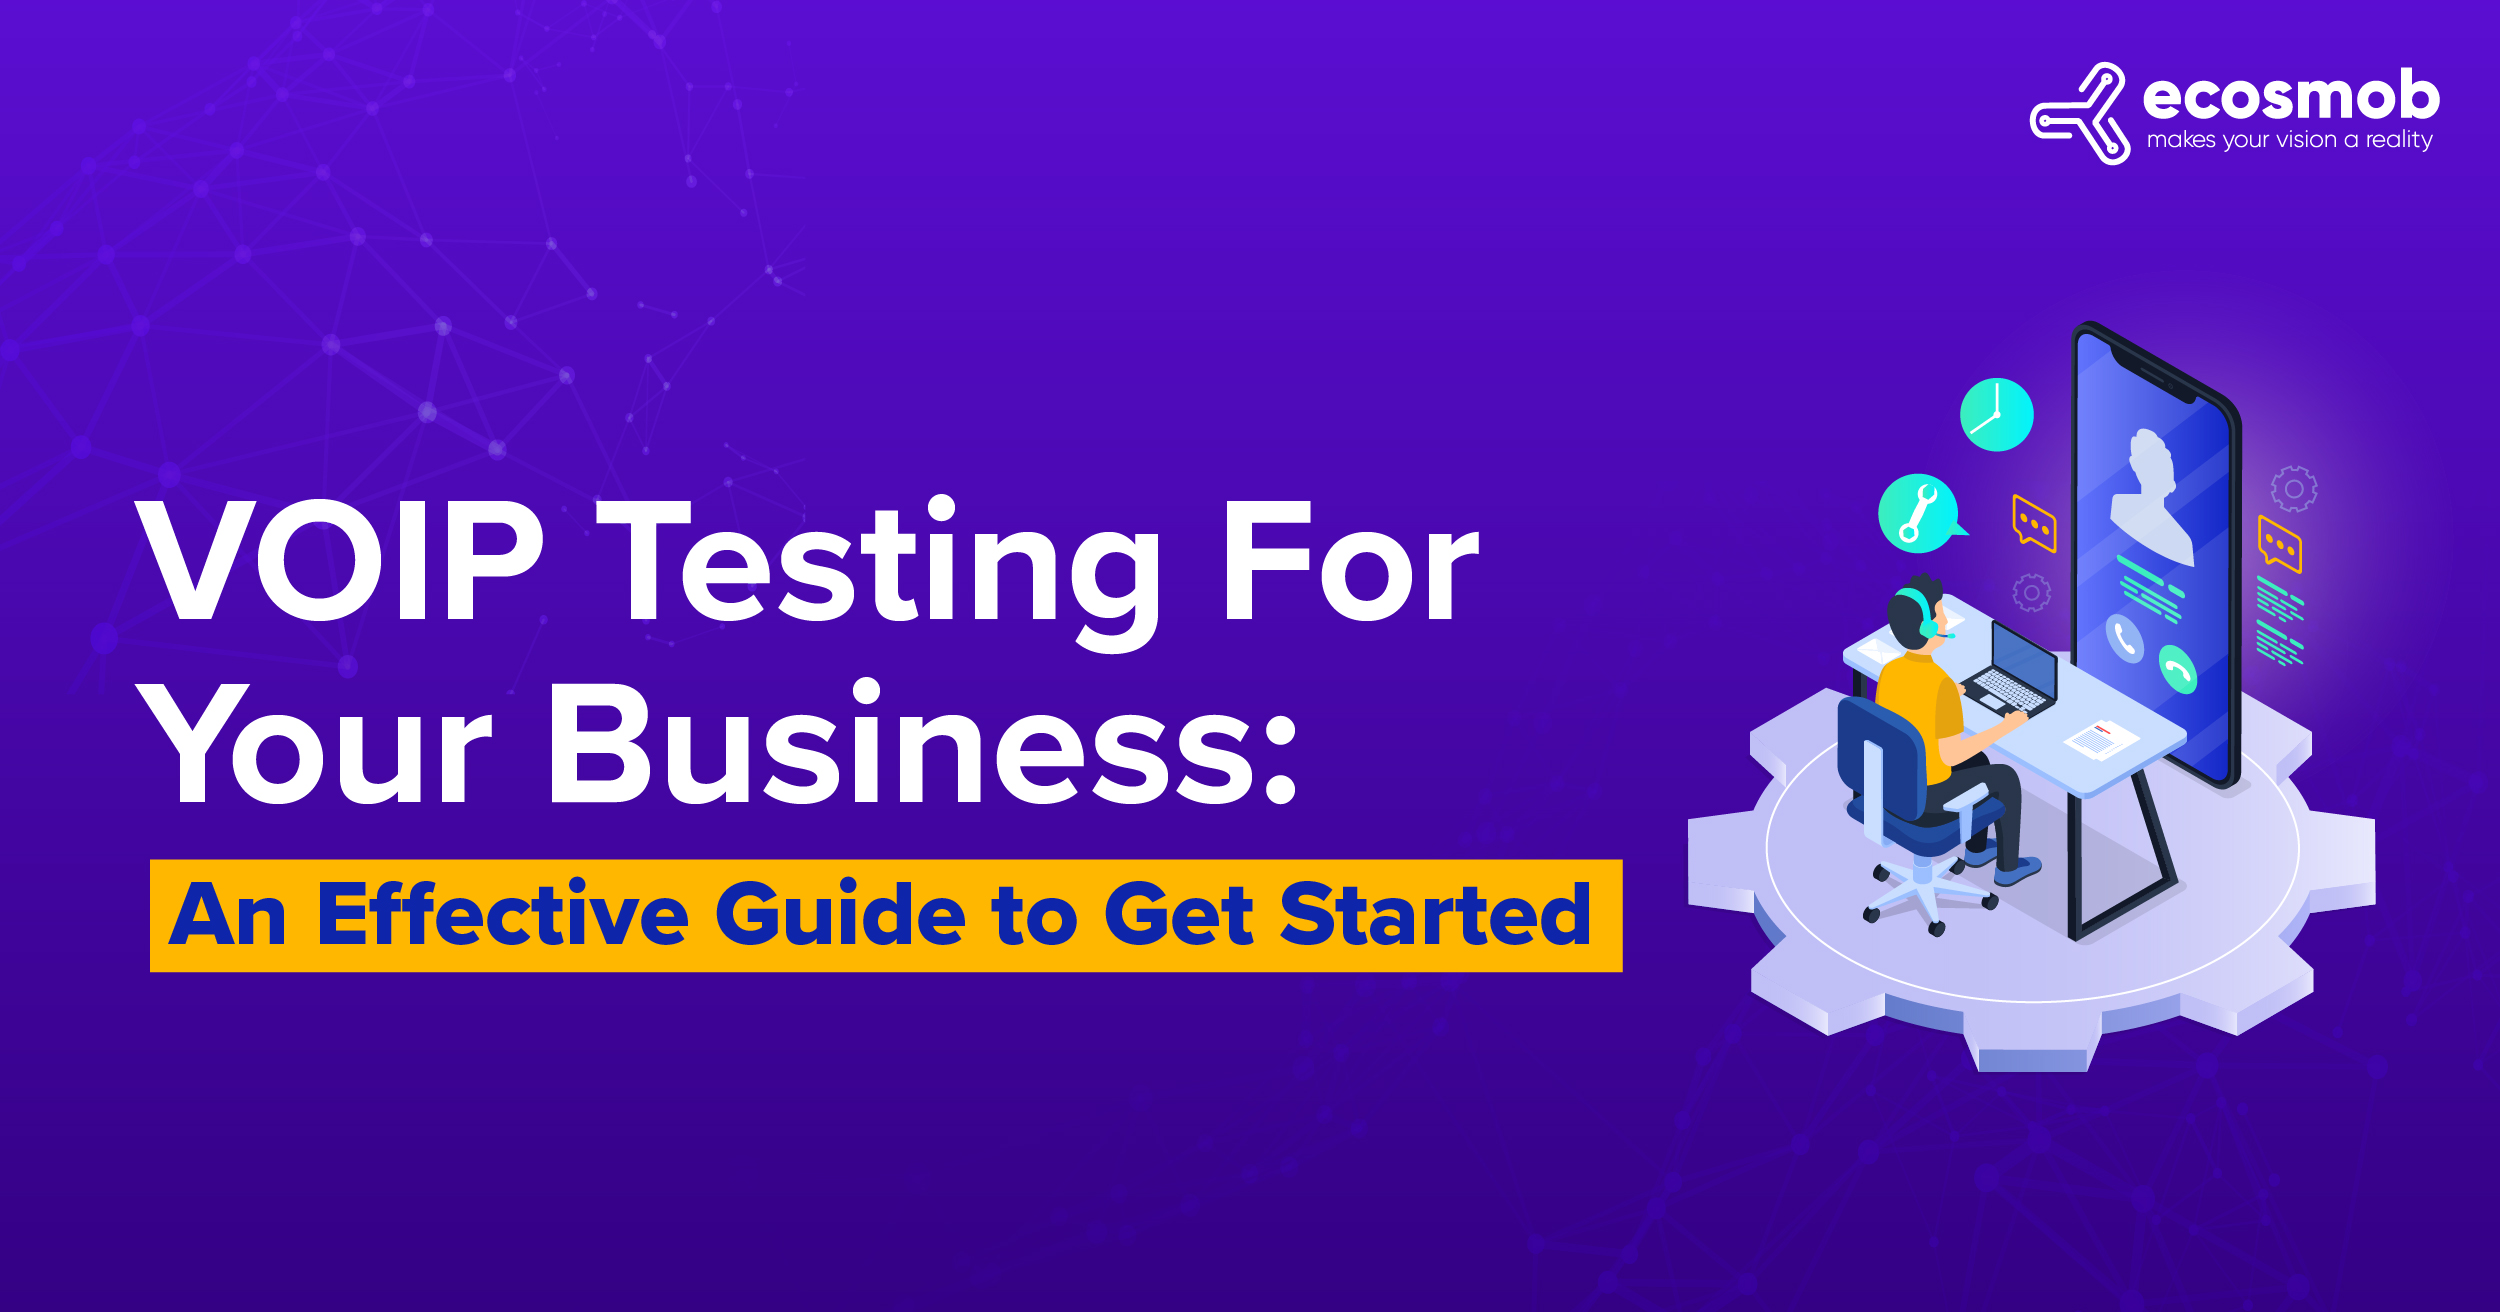 VoIP Testing For Your Business: An Effective Guide to Get Started